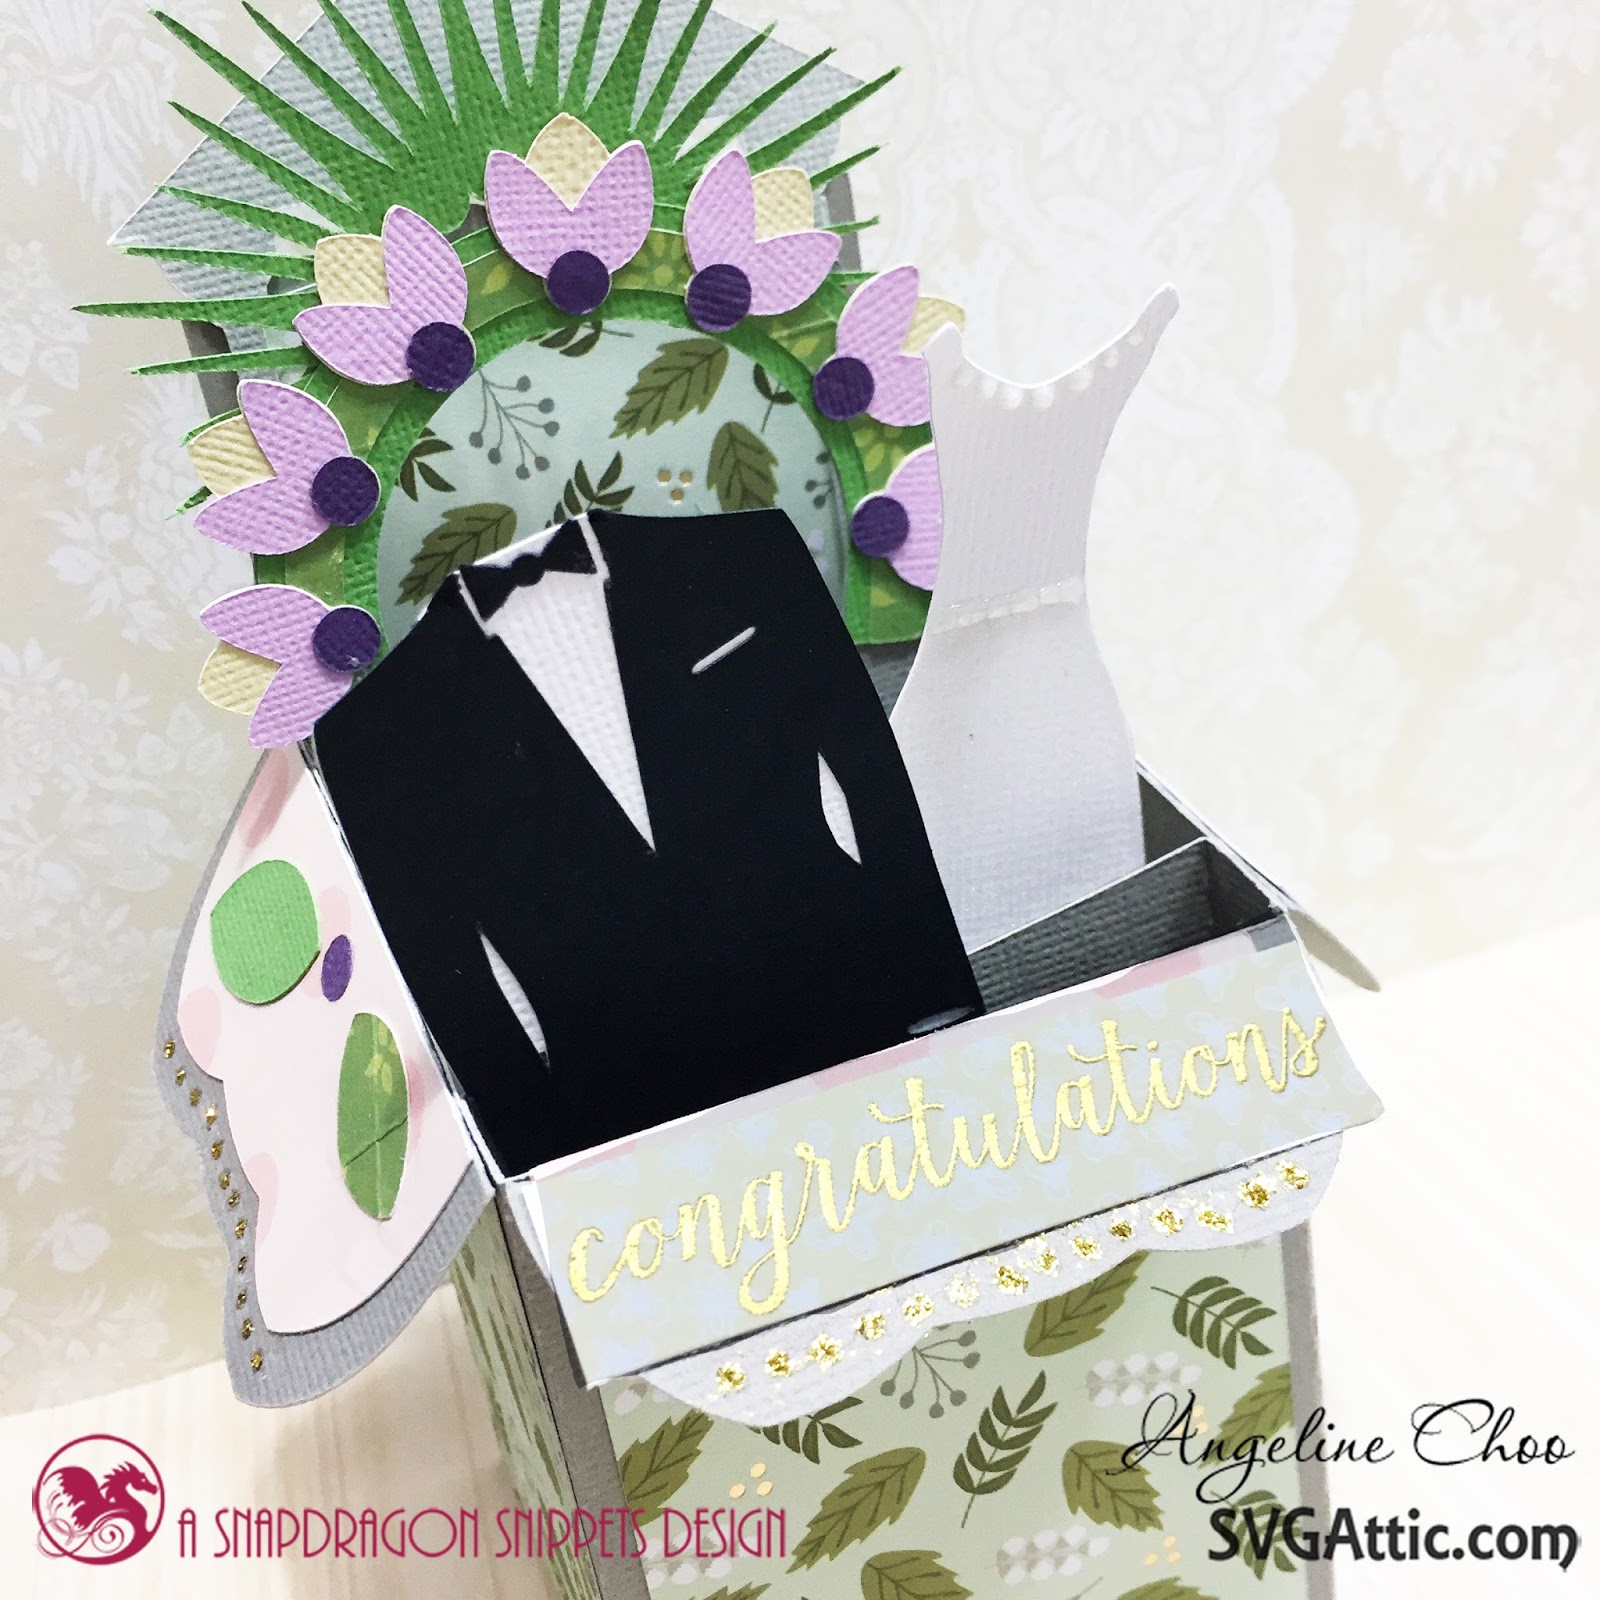 Download SVG Attic Blog: Blooming Wedding Wishes card with Angeline